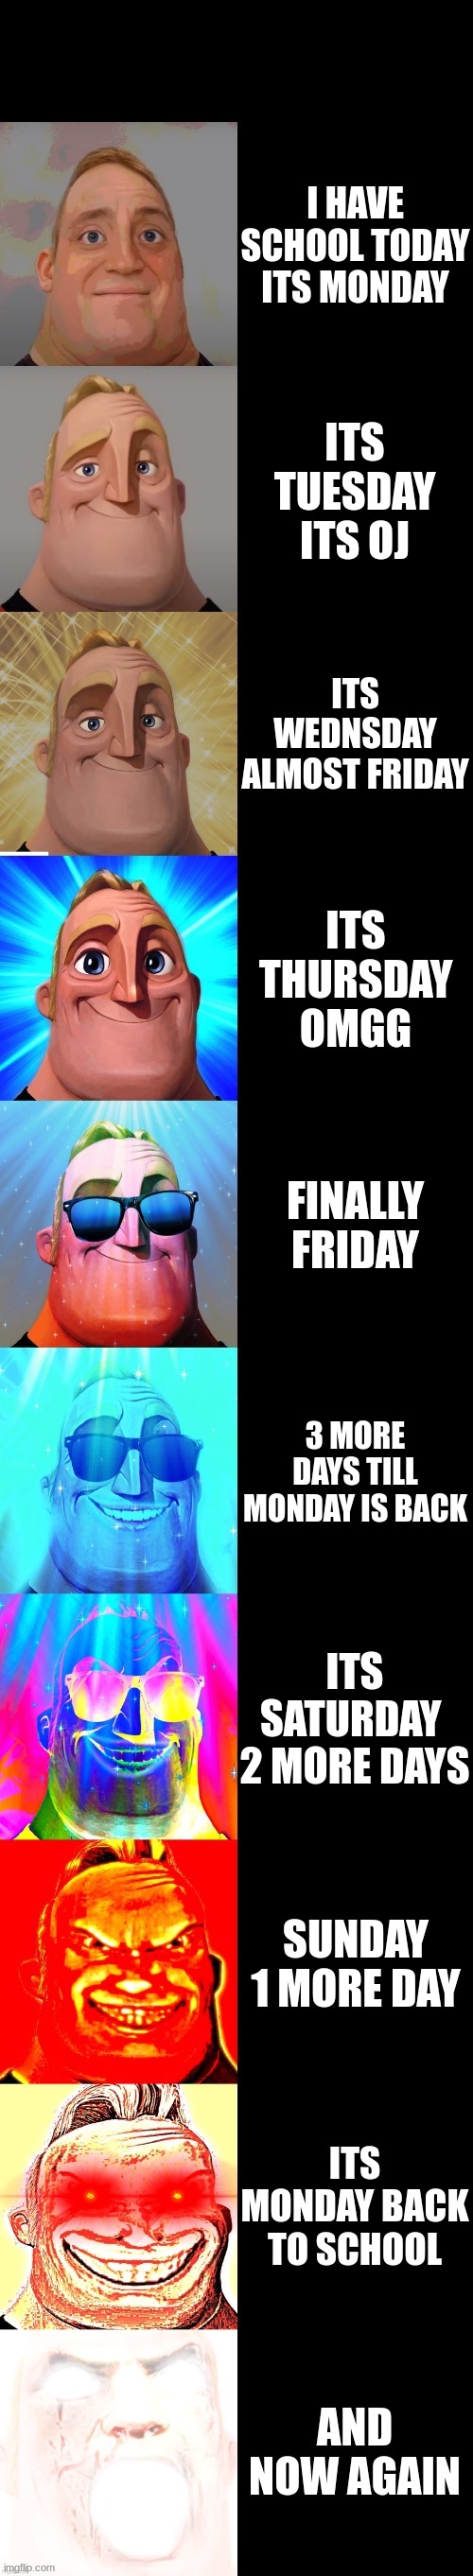 mr incredible becoming canny | I HAVE SCHOOL TODAY ITS MONDAY; ITS TUESDAY ITS OJ; ITS WEDNSDAY ALMOST FRIDAY; ITS THURSDAY OMGG; FINALLY FRIDAY; 3 MORE DAYS TILL MONDAY IS BACK; ITS SATURDAY  2 MORE DAYS; SUNDAY 1 MORE DAY; ITS MONDAY BACK TO SCHOOL; AND NOW AGAIN | image tagged in mr incredible becoming canny | made w/ Imgflip meme maker